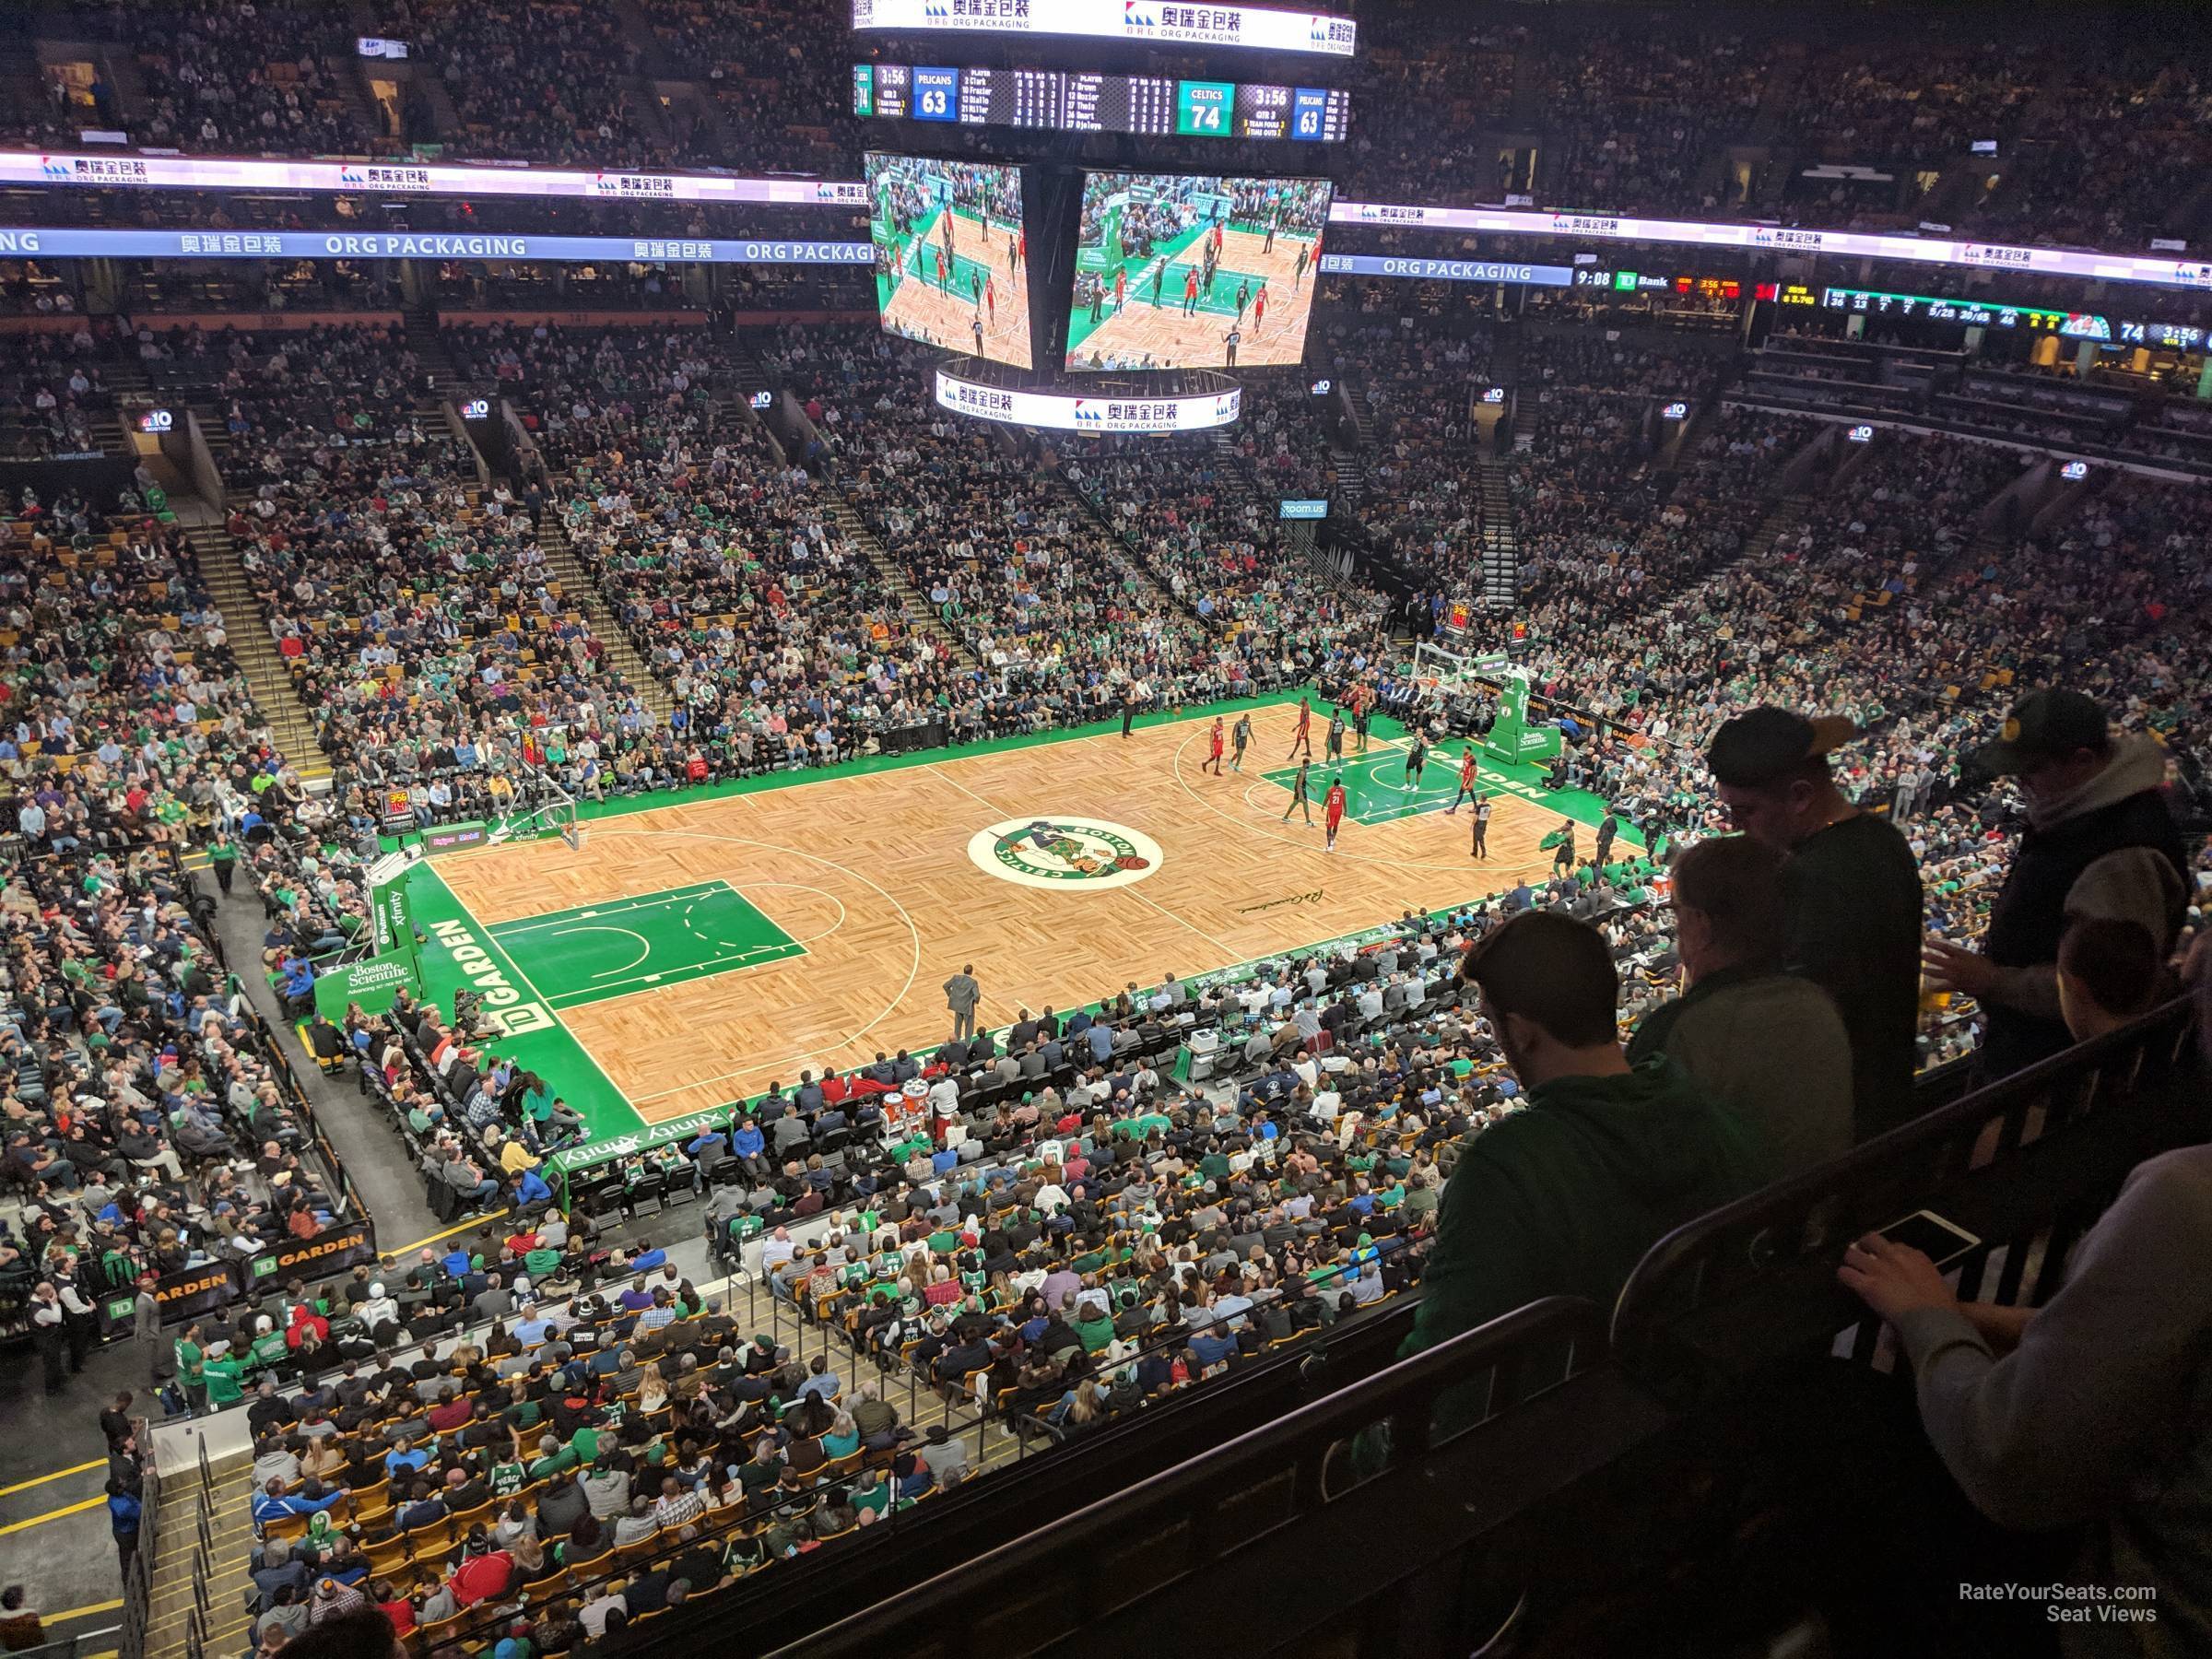 section 303, row 3 seat view  for basketball - td garden